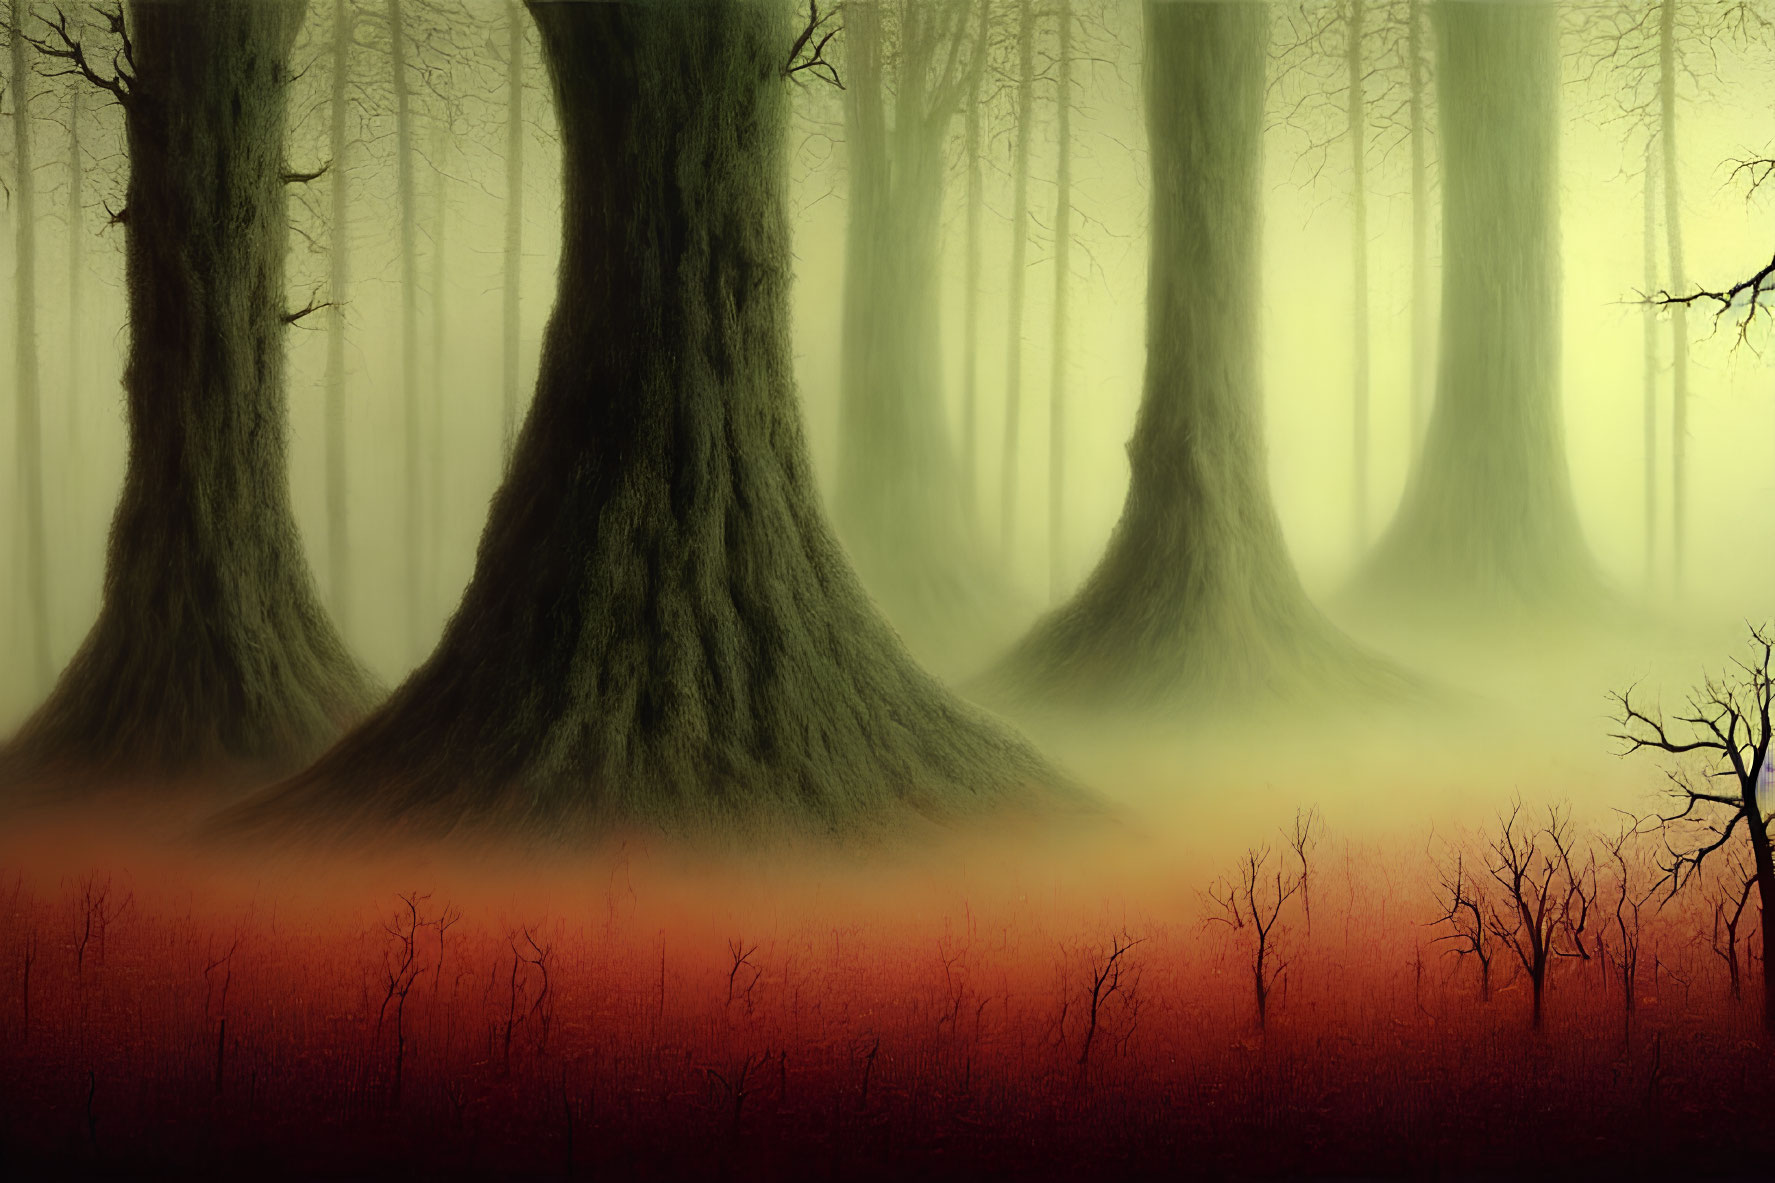 Misty forest with large trees and red undergrowth in fog